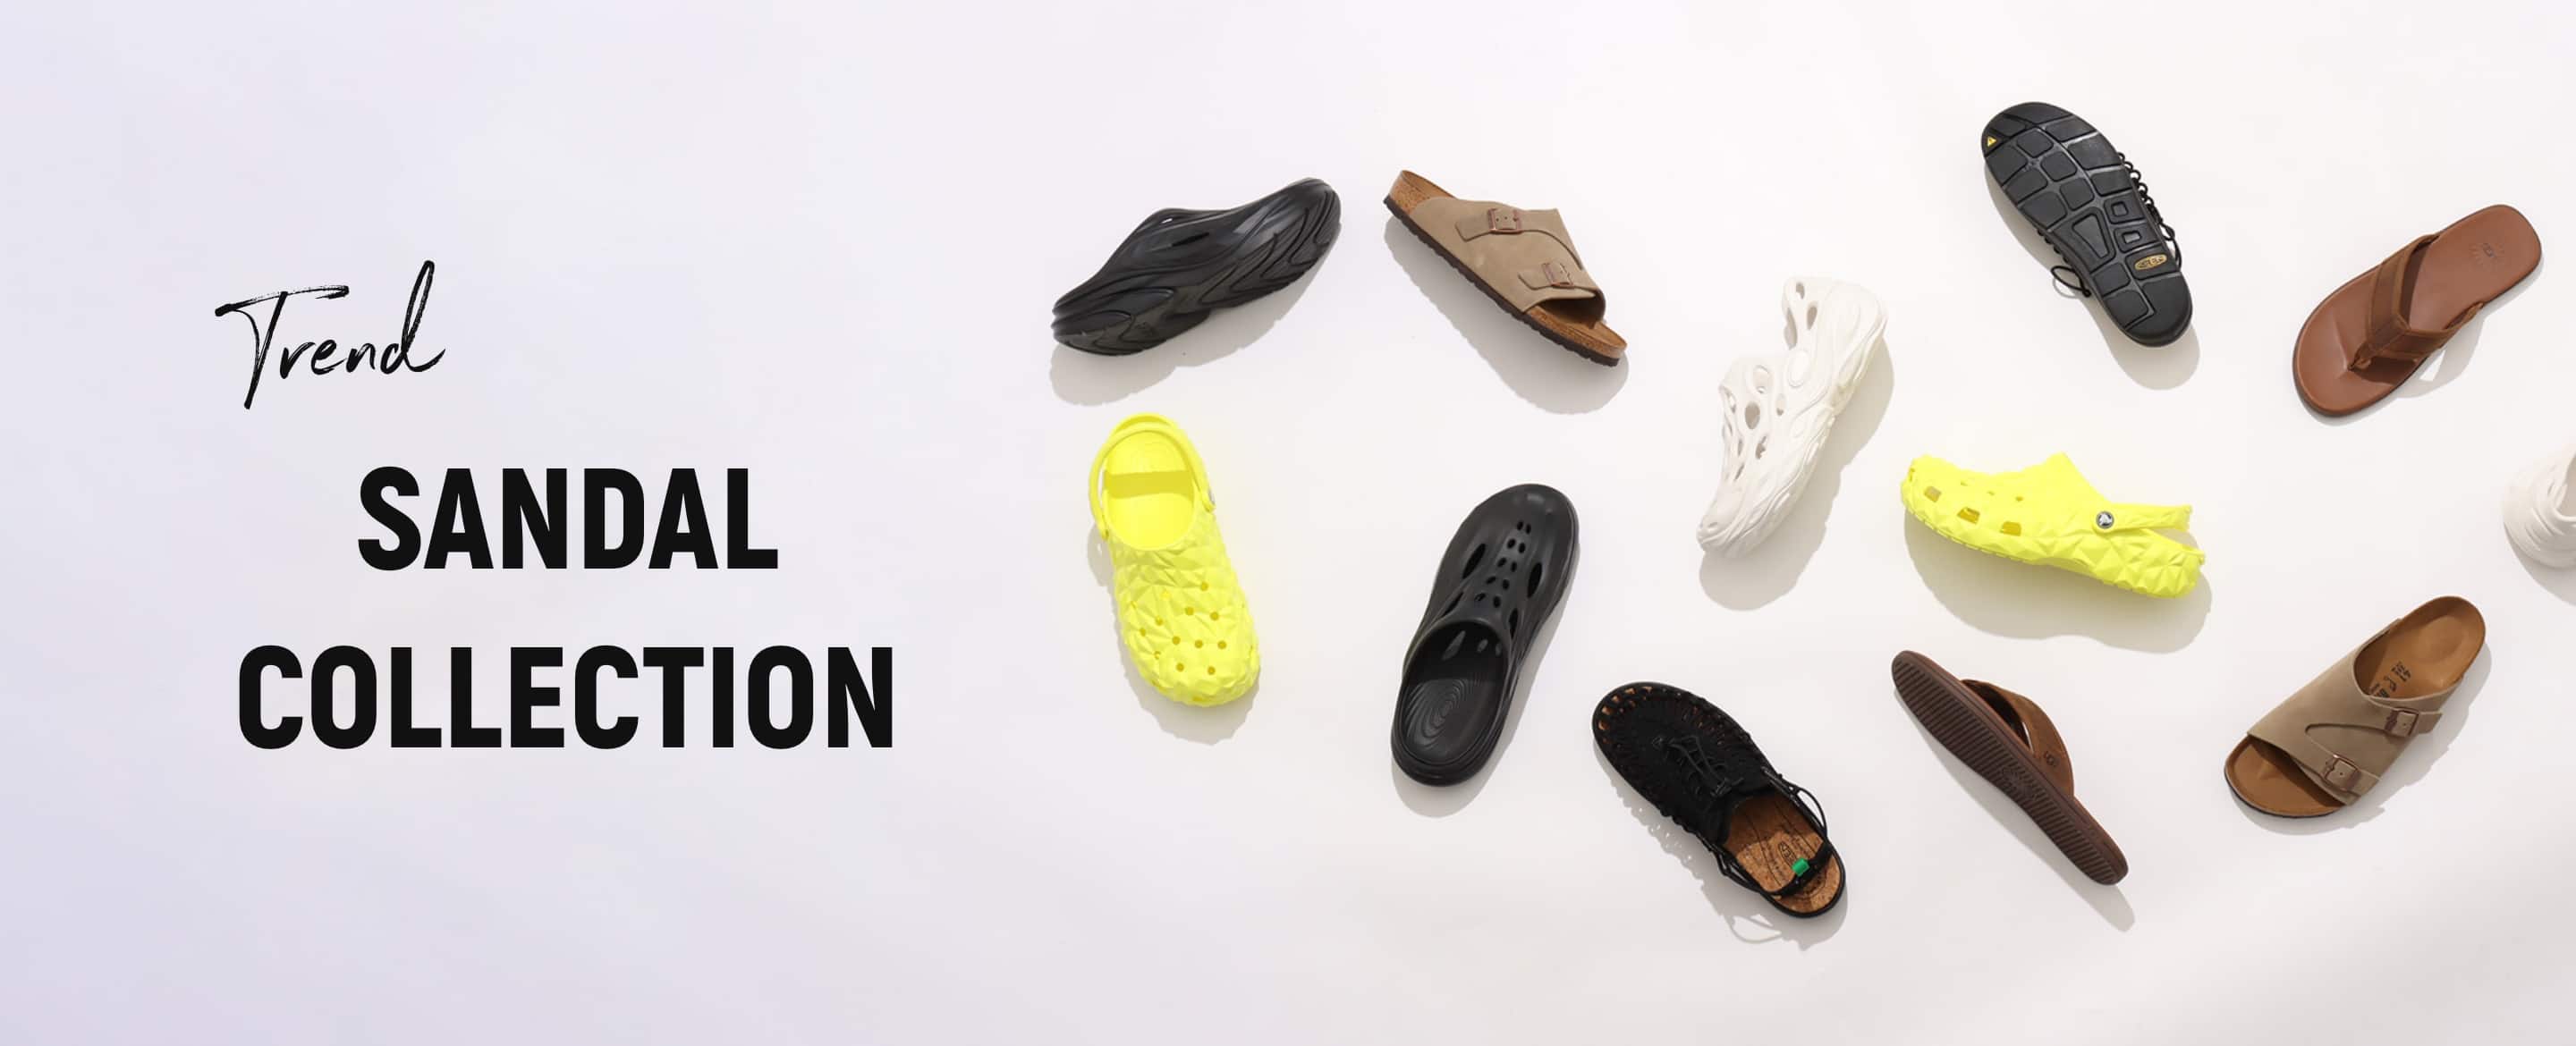 TREND SANDAL COLLECTION